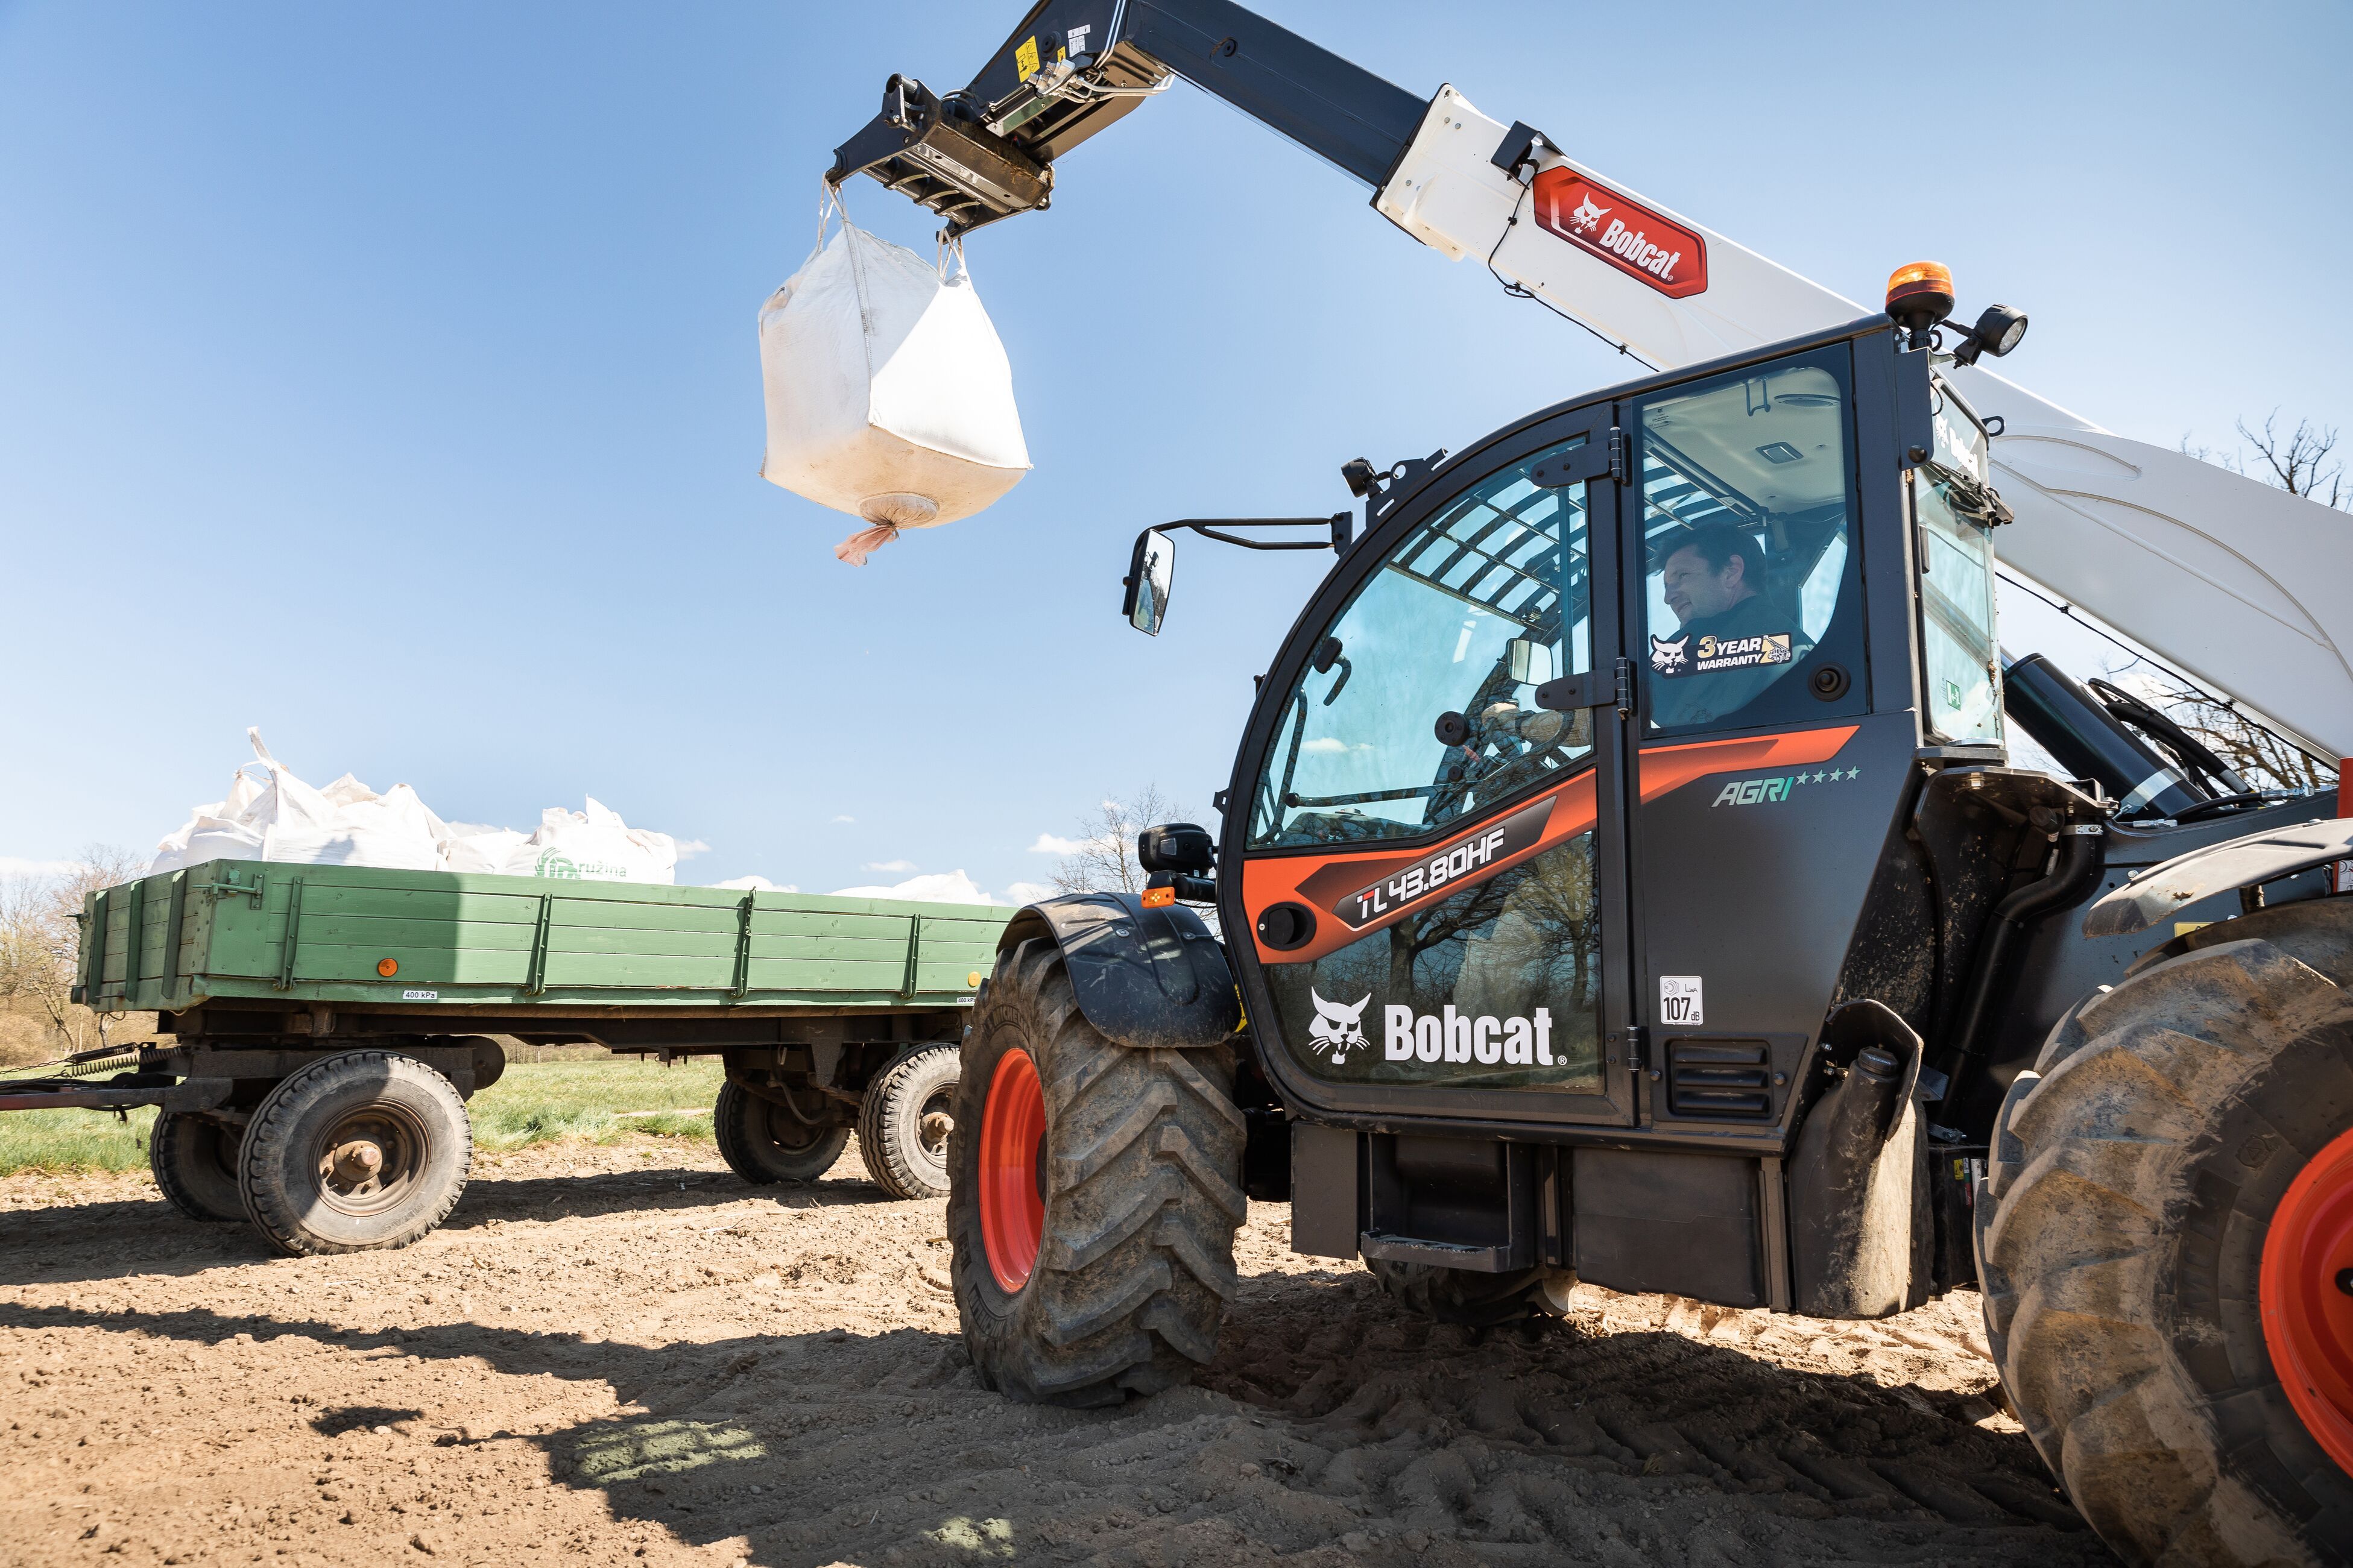 First View of New Bobcat Agricultural Telehandlers at LAMMA